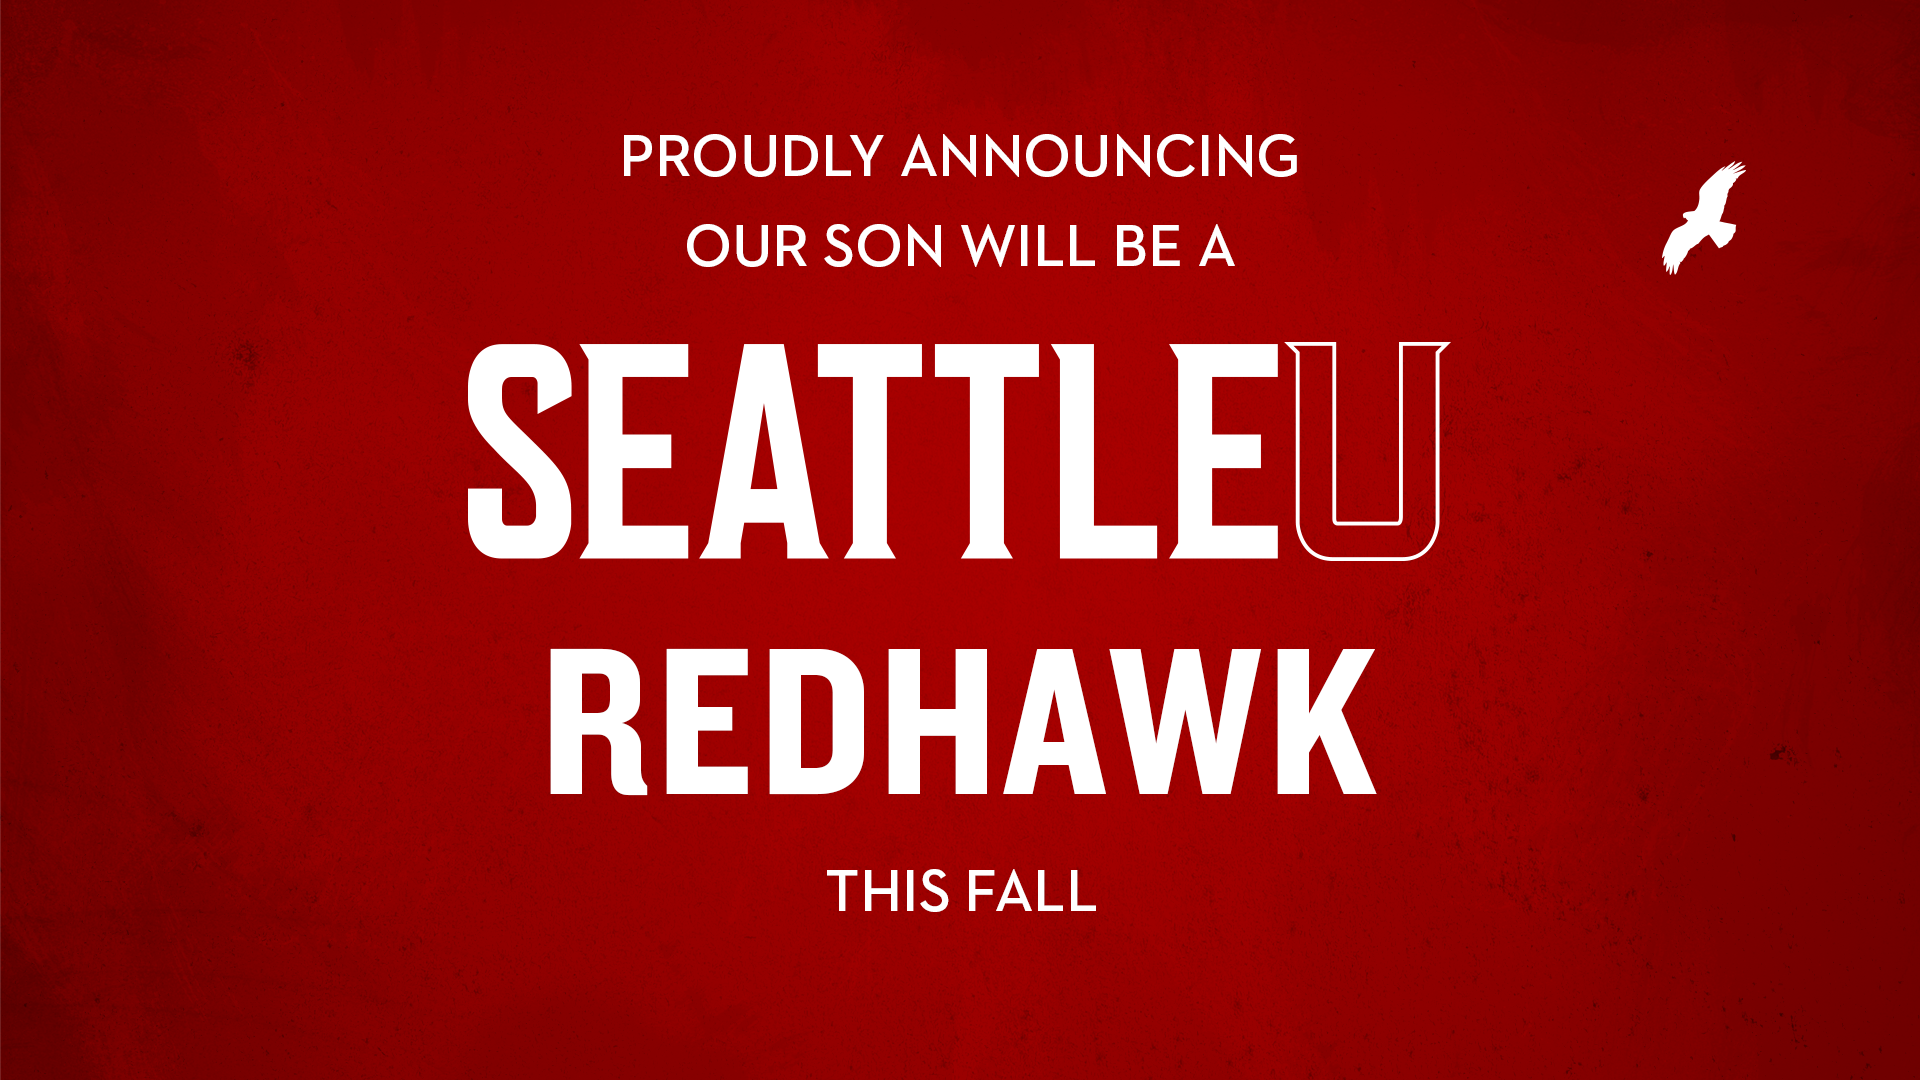 Proudly Announcing Our Redhawk Son